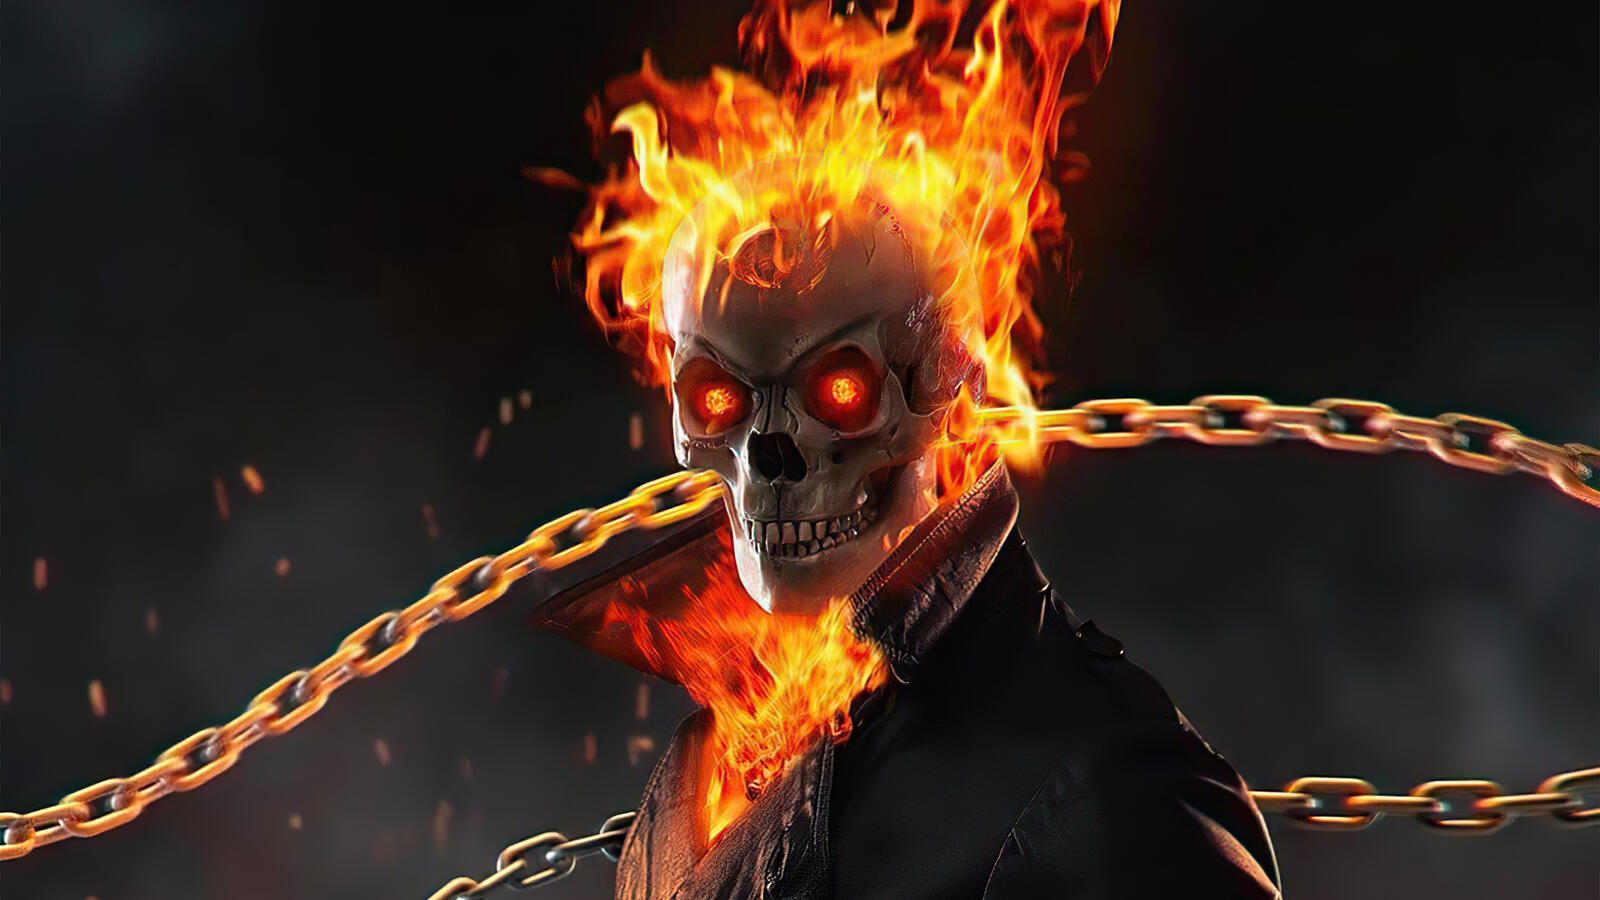 Wallpapers ghost rider chain skull on the desktop